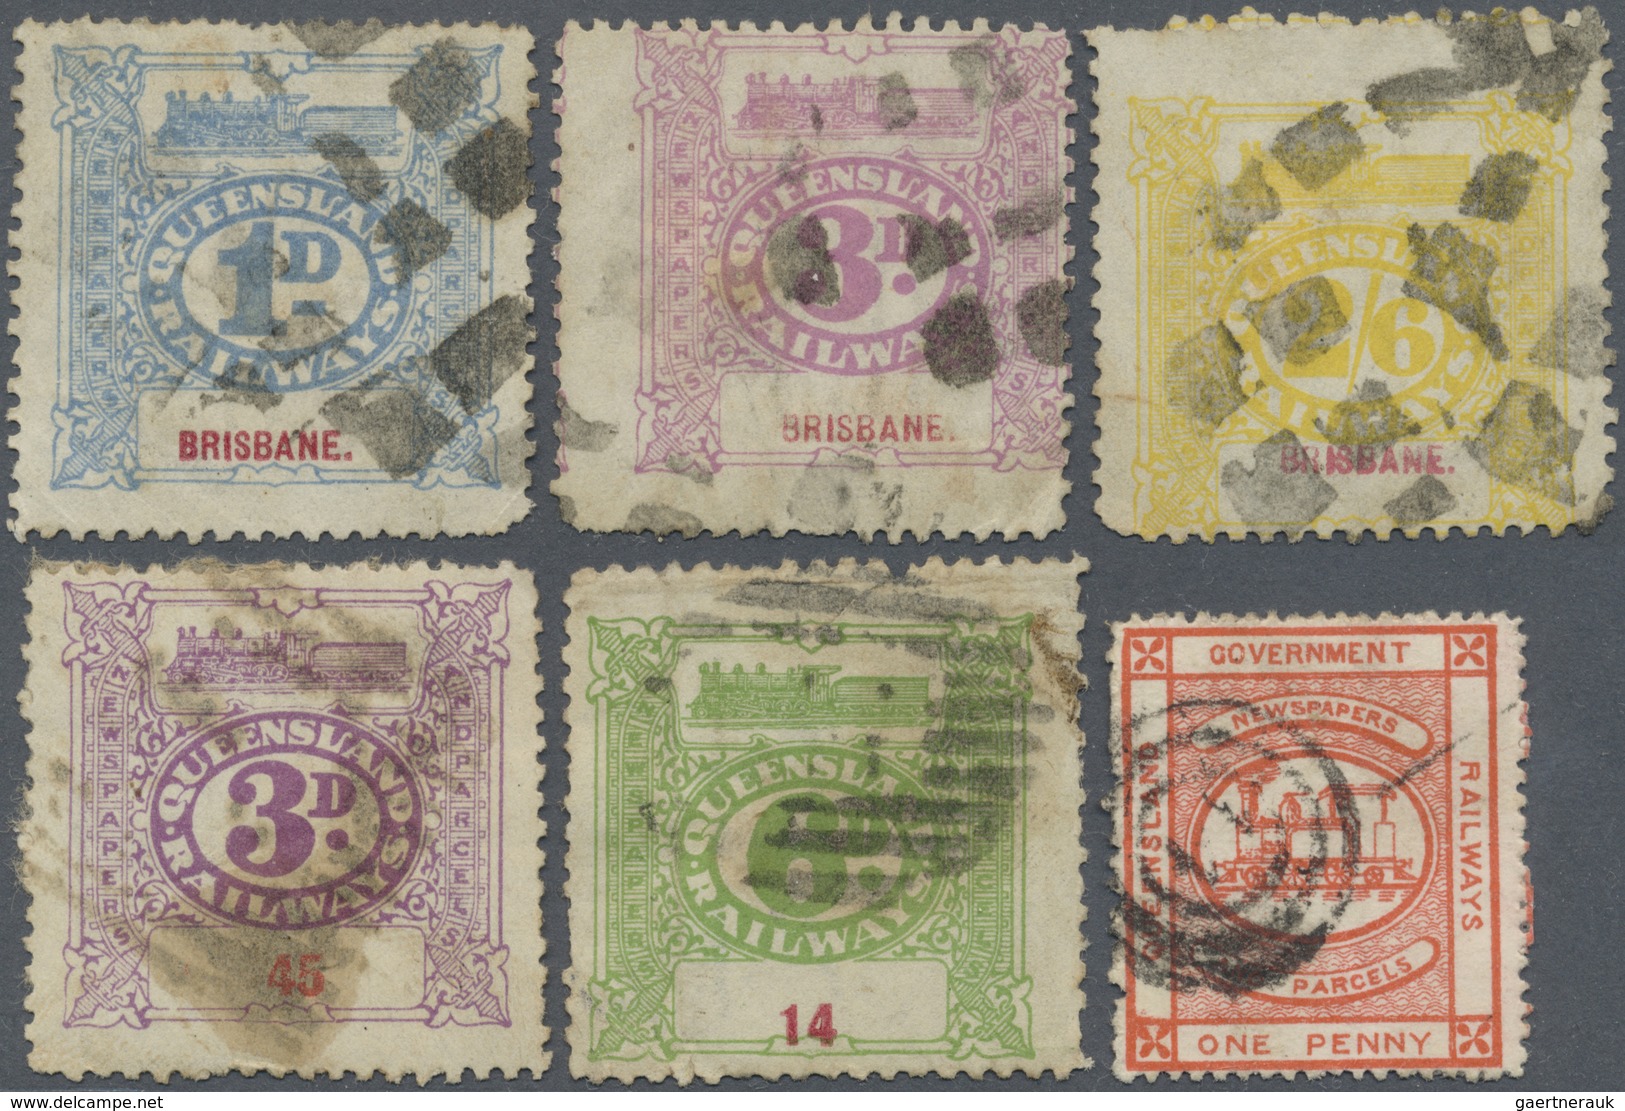 GA/Br Australische Staaten: 1897/1900 (ca.), mainly Queensland and NSW, covers (4), used stationery (13 in